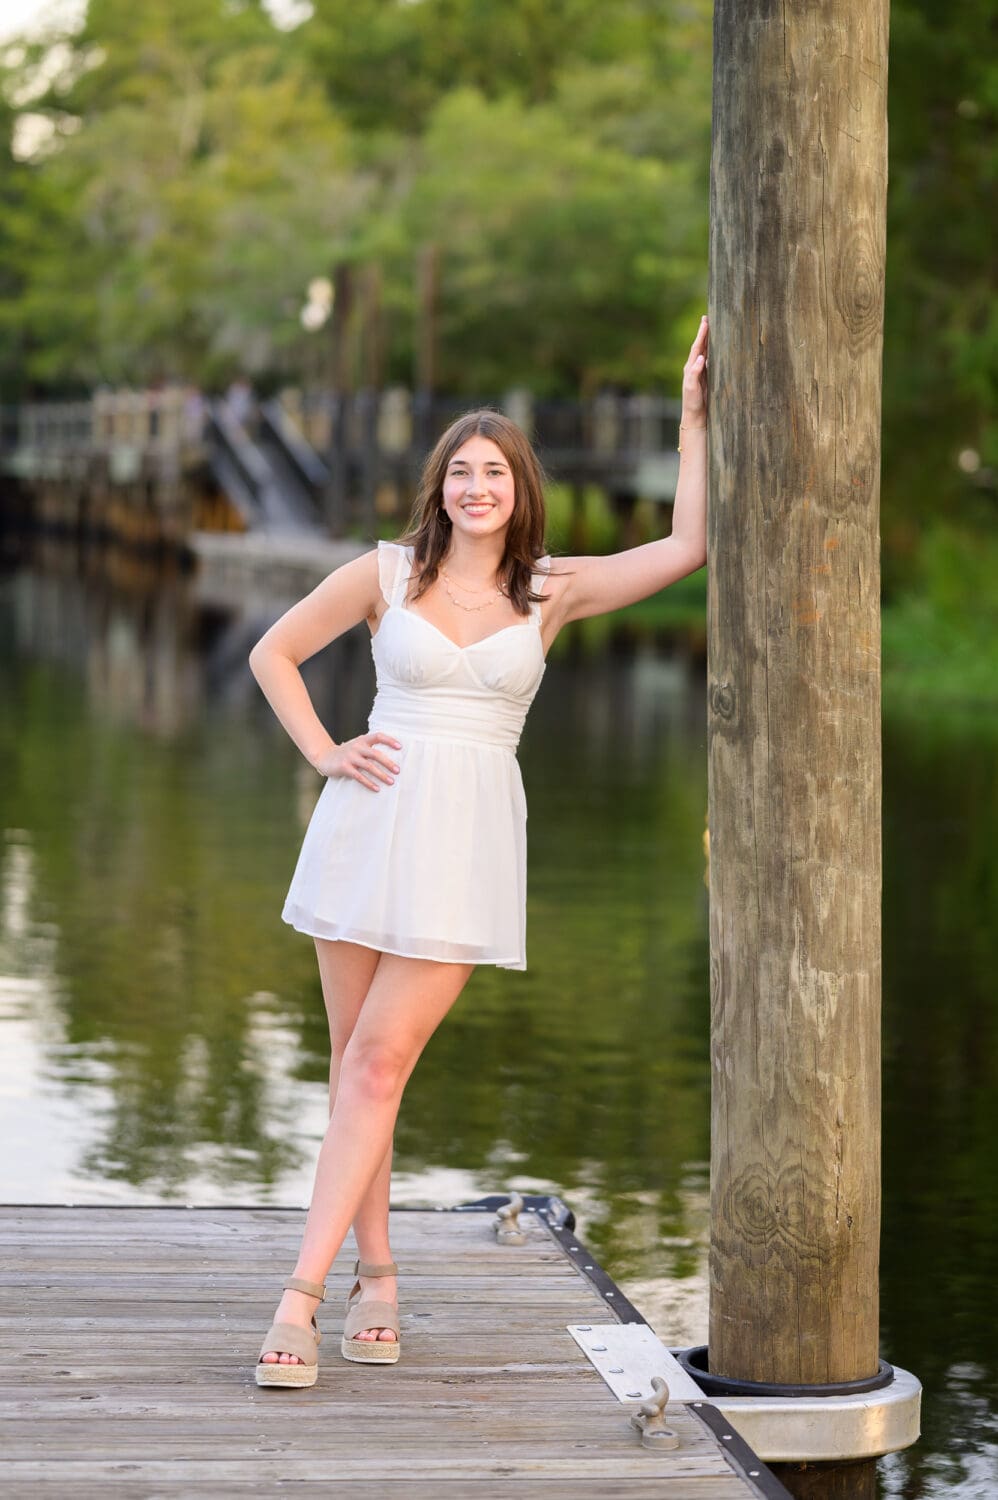 Senior portrait leaning on the dock on the river - Conway River Walk